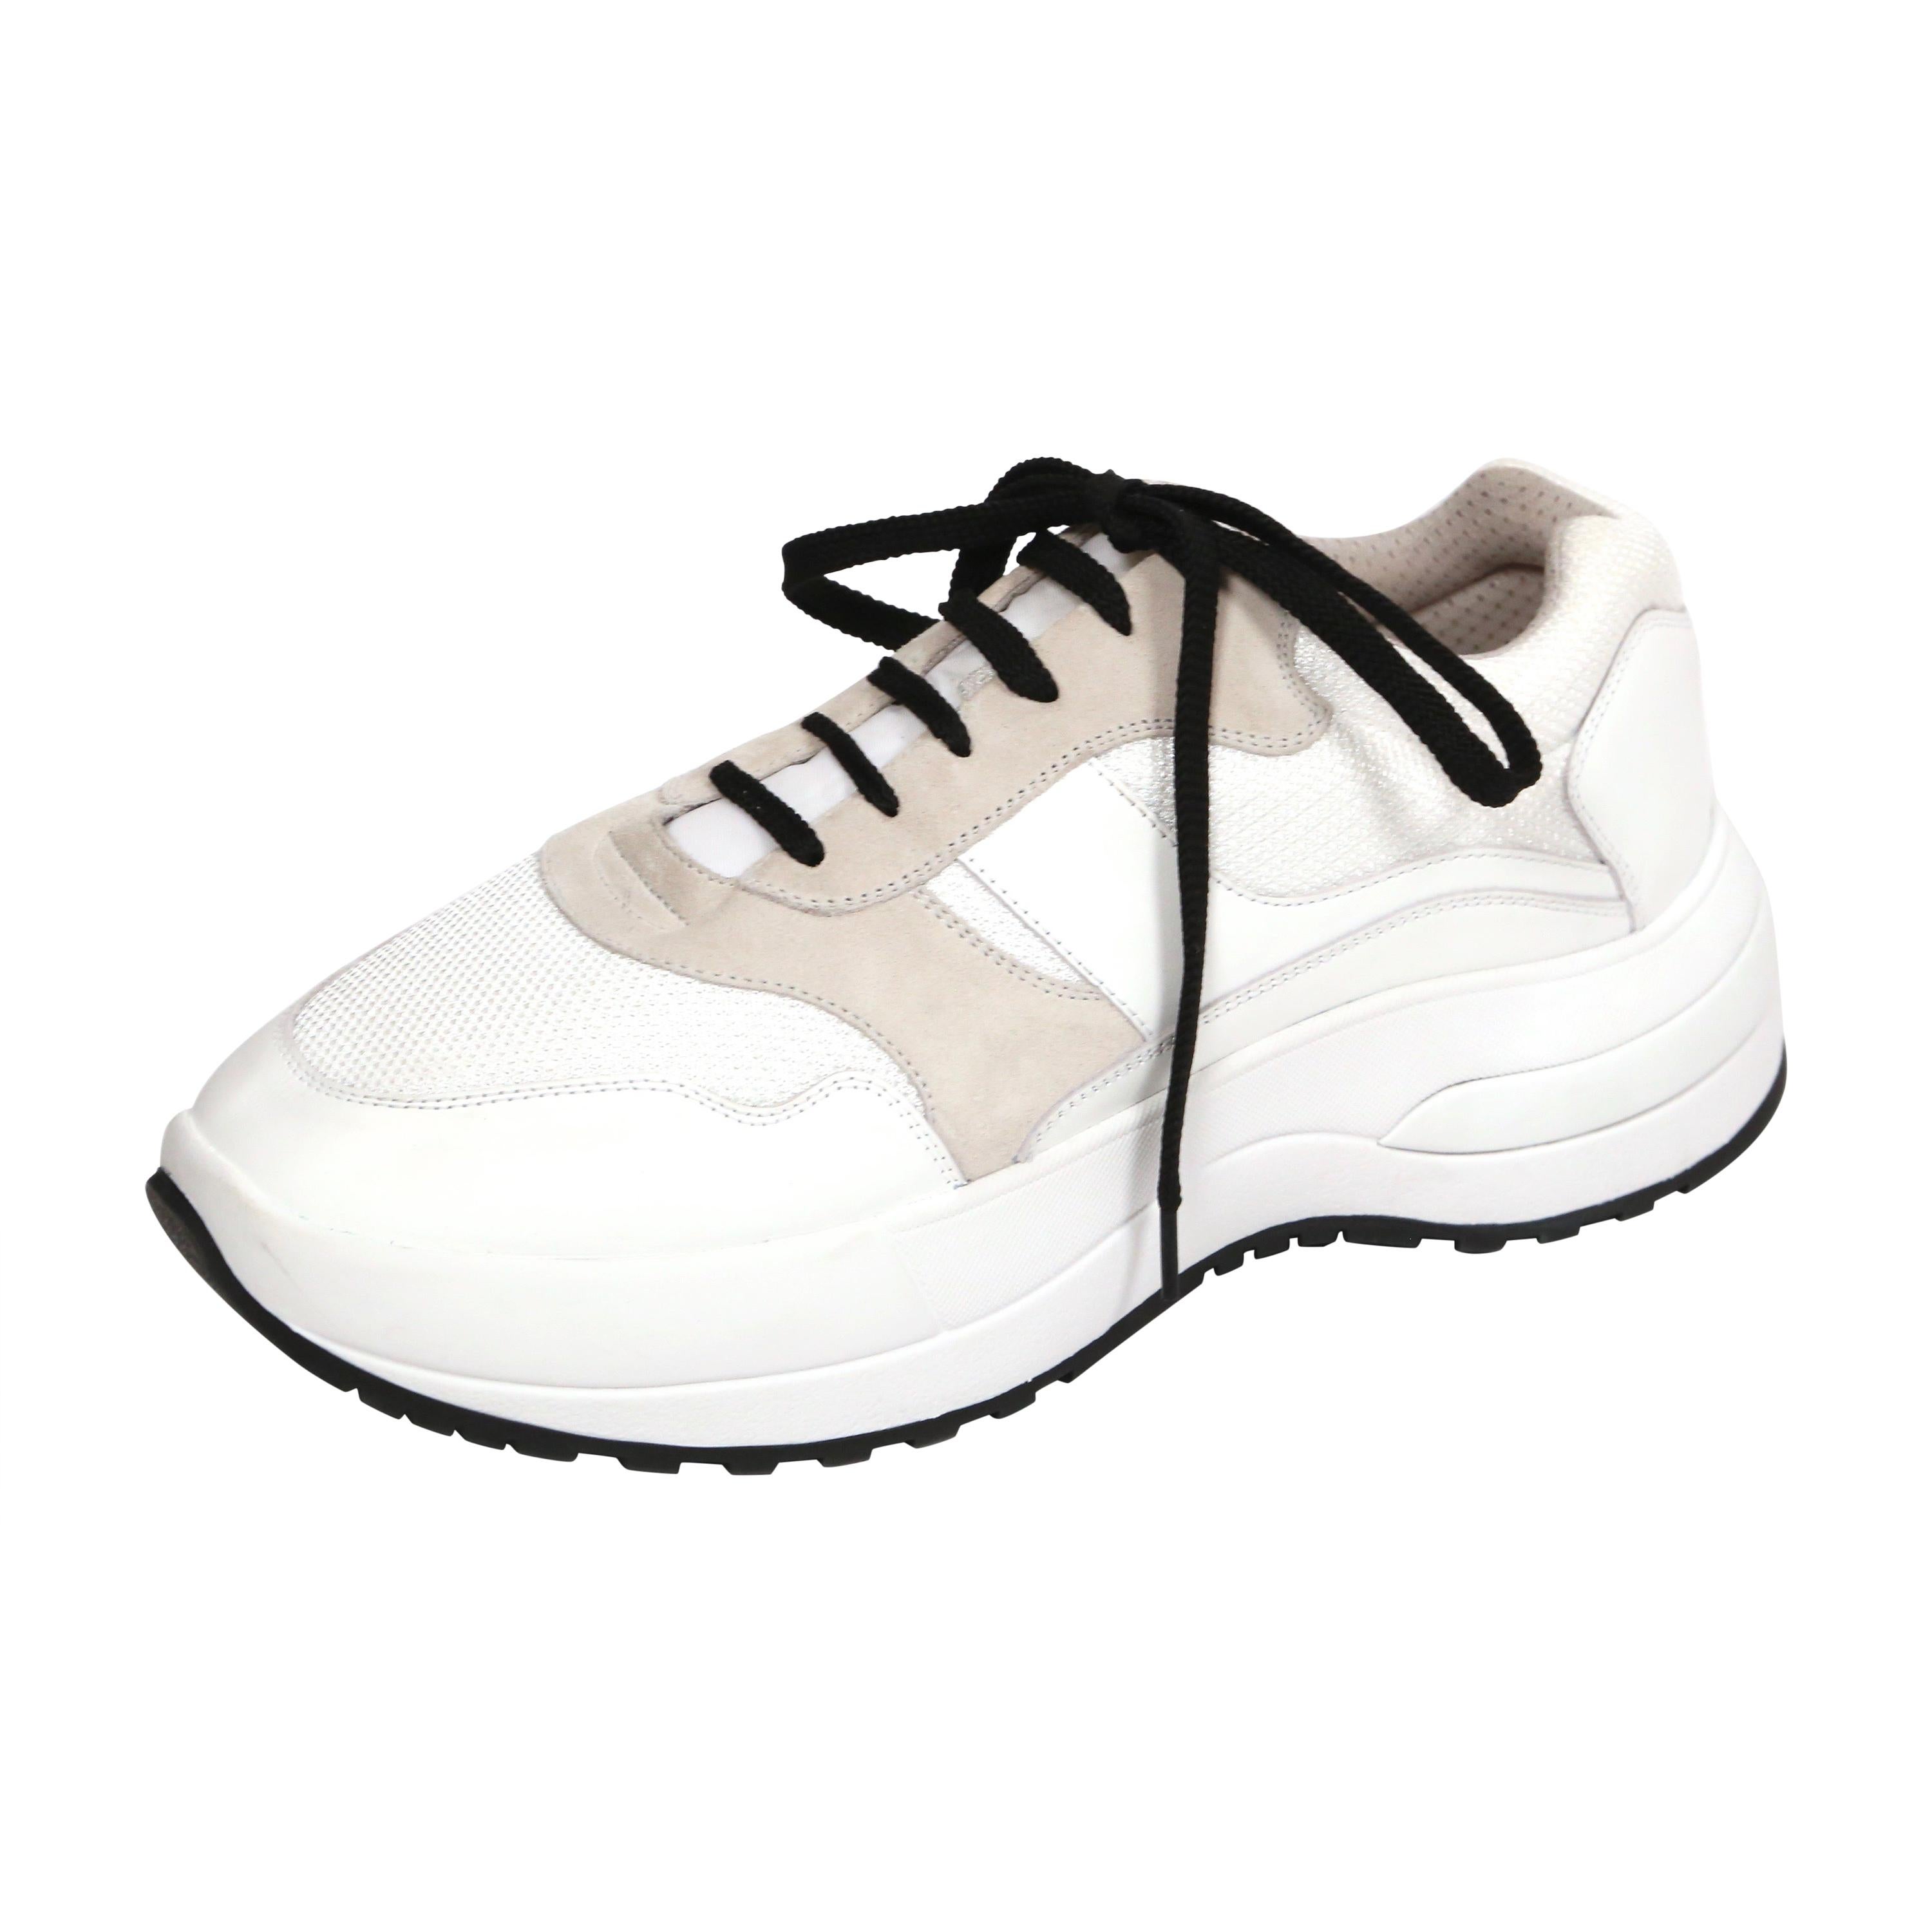 CELINE by PHOEBE PHILO white leather 'Delivery' sneakers - 41 - NEW